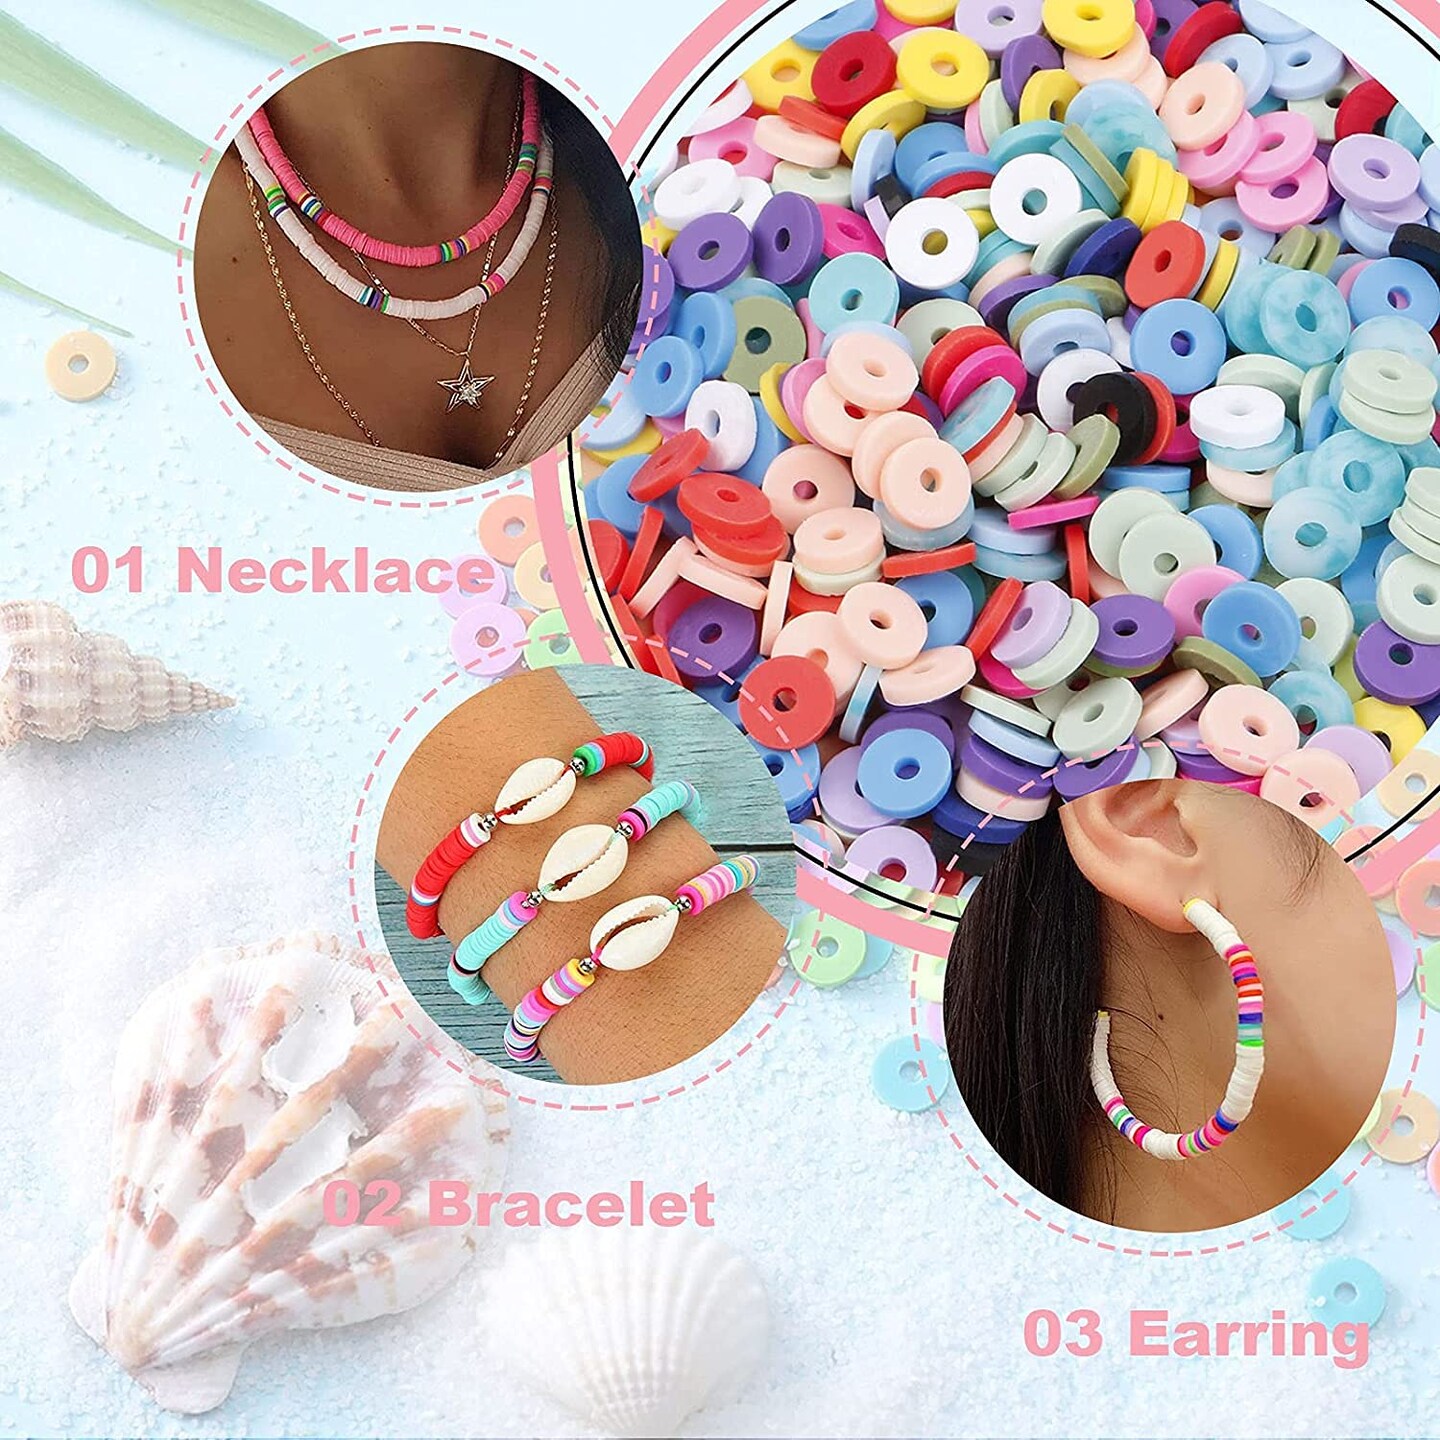  BOCAR 6mm 10 Strands Clay Beads Kit Vinyl Flat Handmade Polymer  Clay Beads with 2 Strands Alloy Beads Spacer for Jewelry Making Necklace  Bracelet Earrings Finding (CB-001-mix 1)